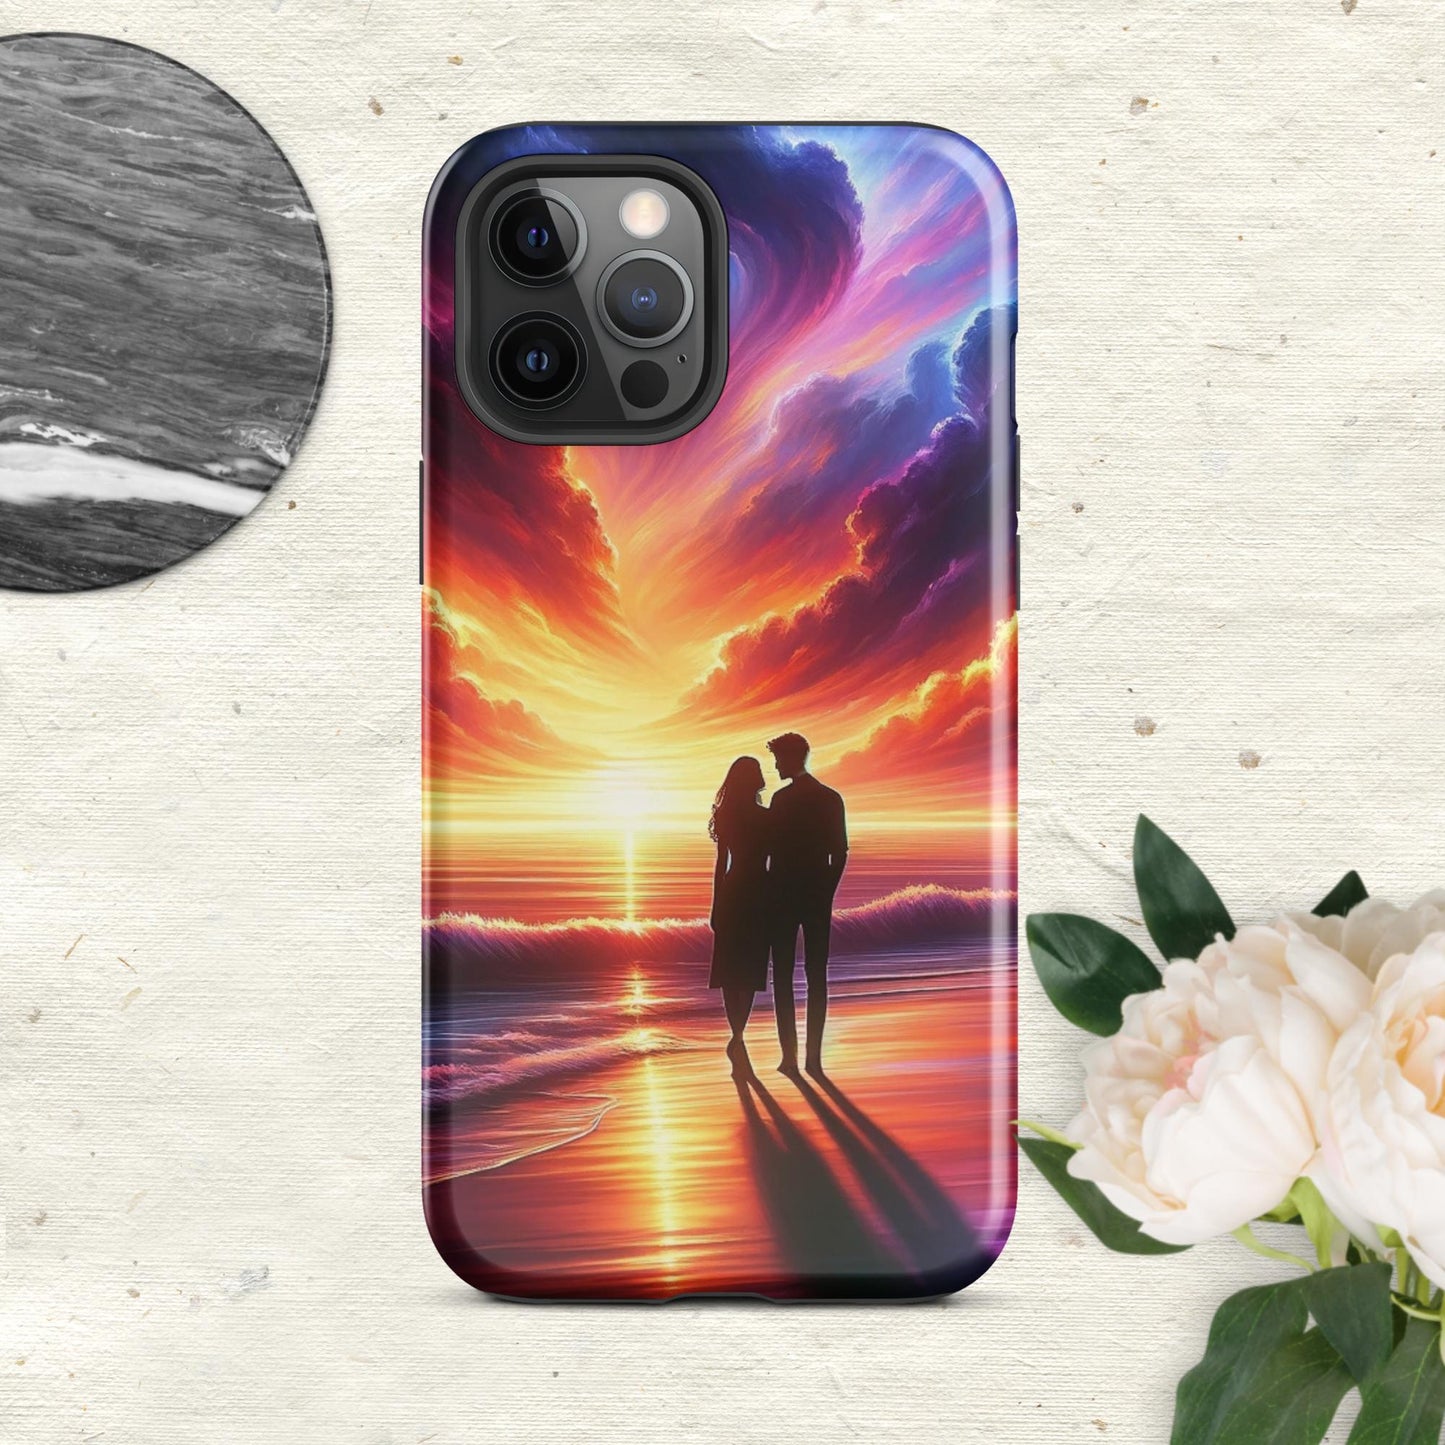 The Hologram Hook Up Glossy / iPhone 12 Pro Max Lovers Sunset Tough Case for iPhone®